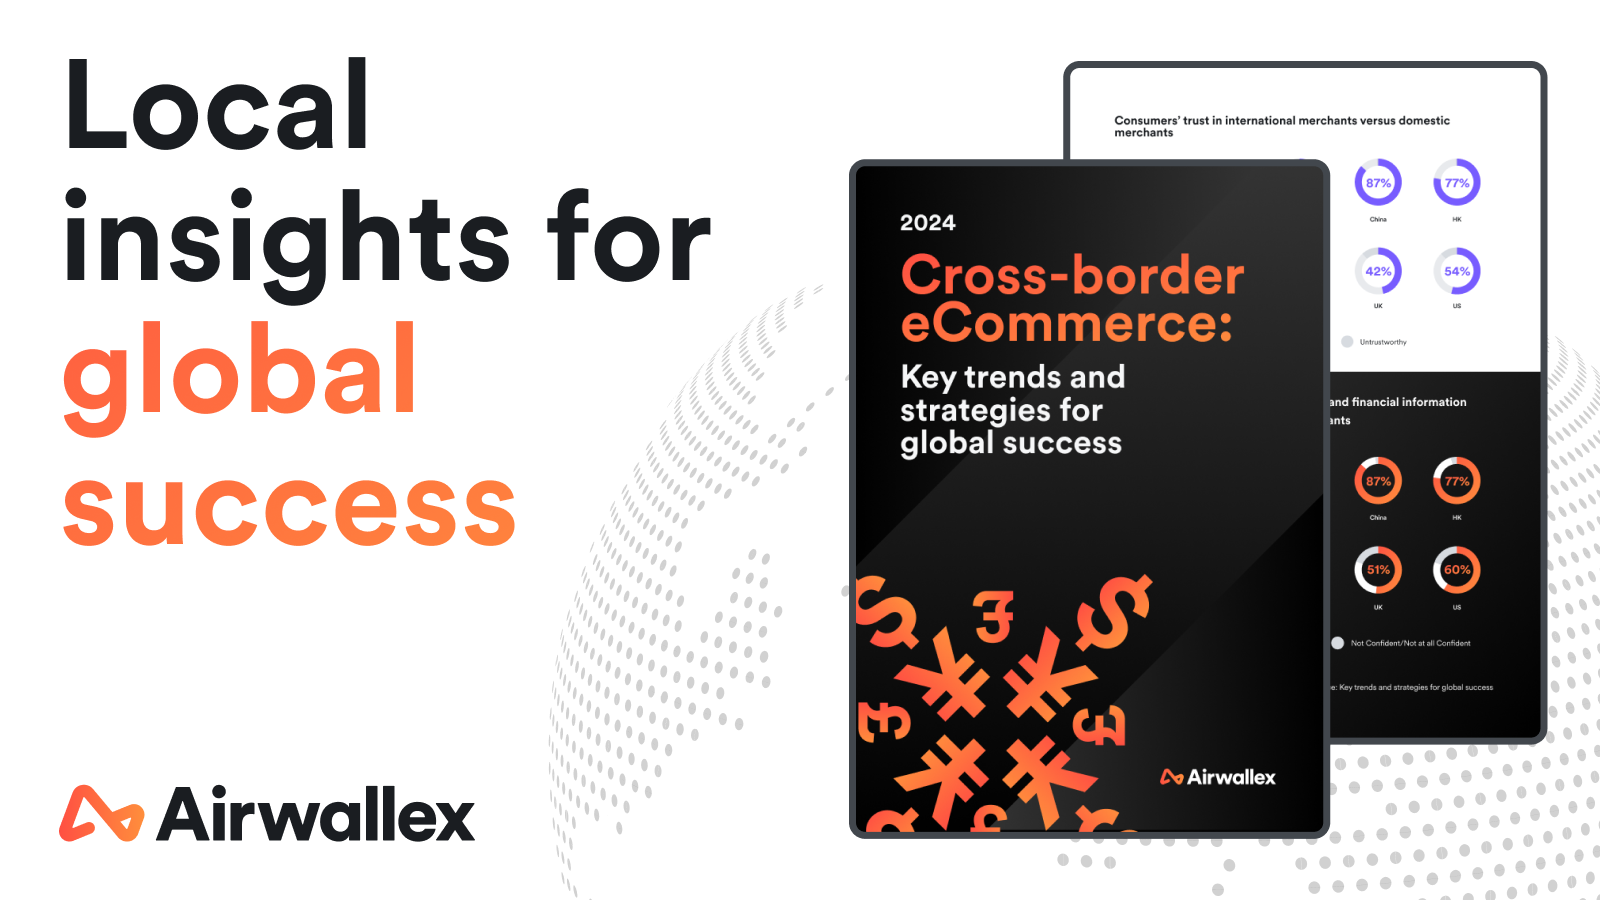 Cross-border spending surging, 54% of global consumers expect to increase amount of international online shopping but expect more payment flexibility and transparency in 2024